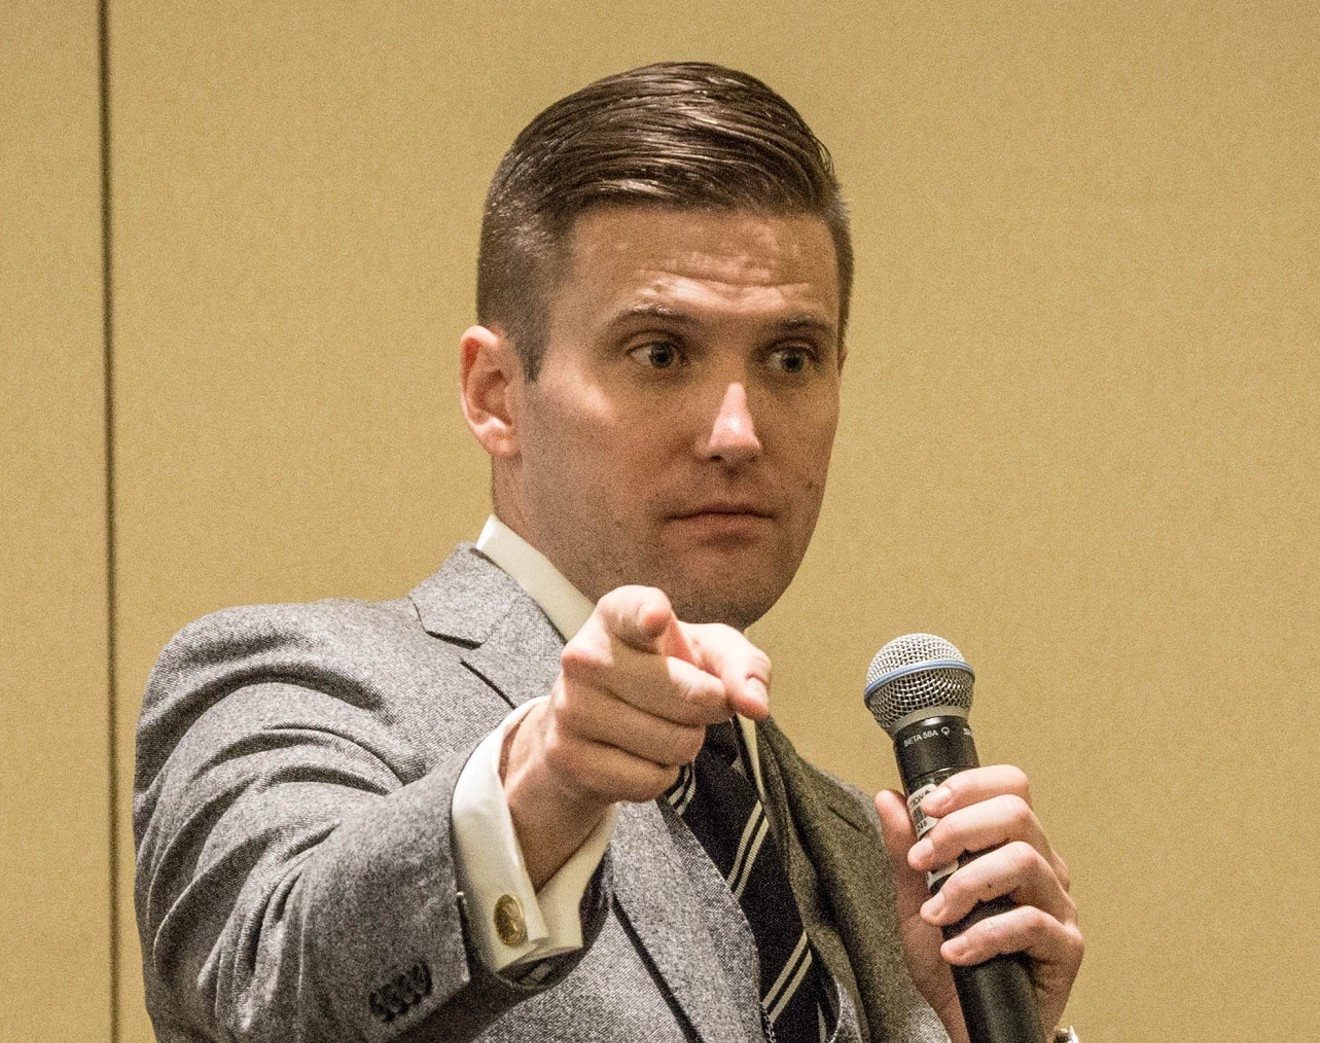 Richard Spencer is not euphemistic about white supremacy. We shouldn't be euphemistic about him.